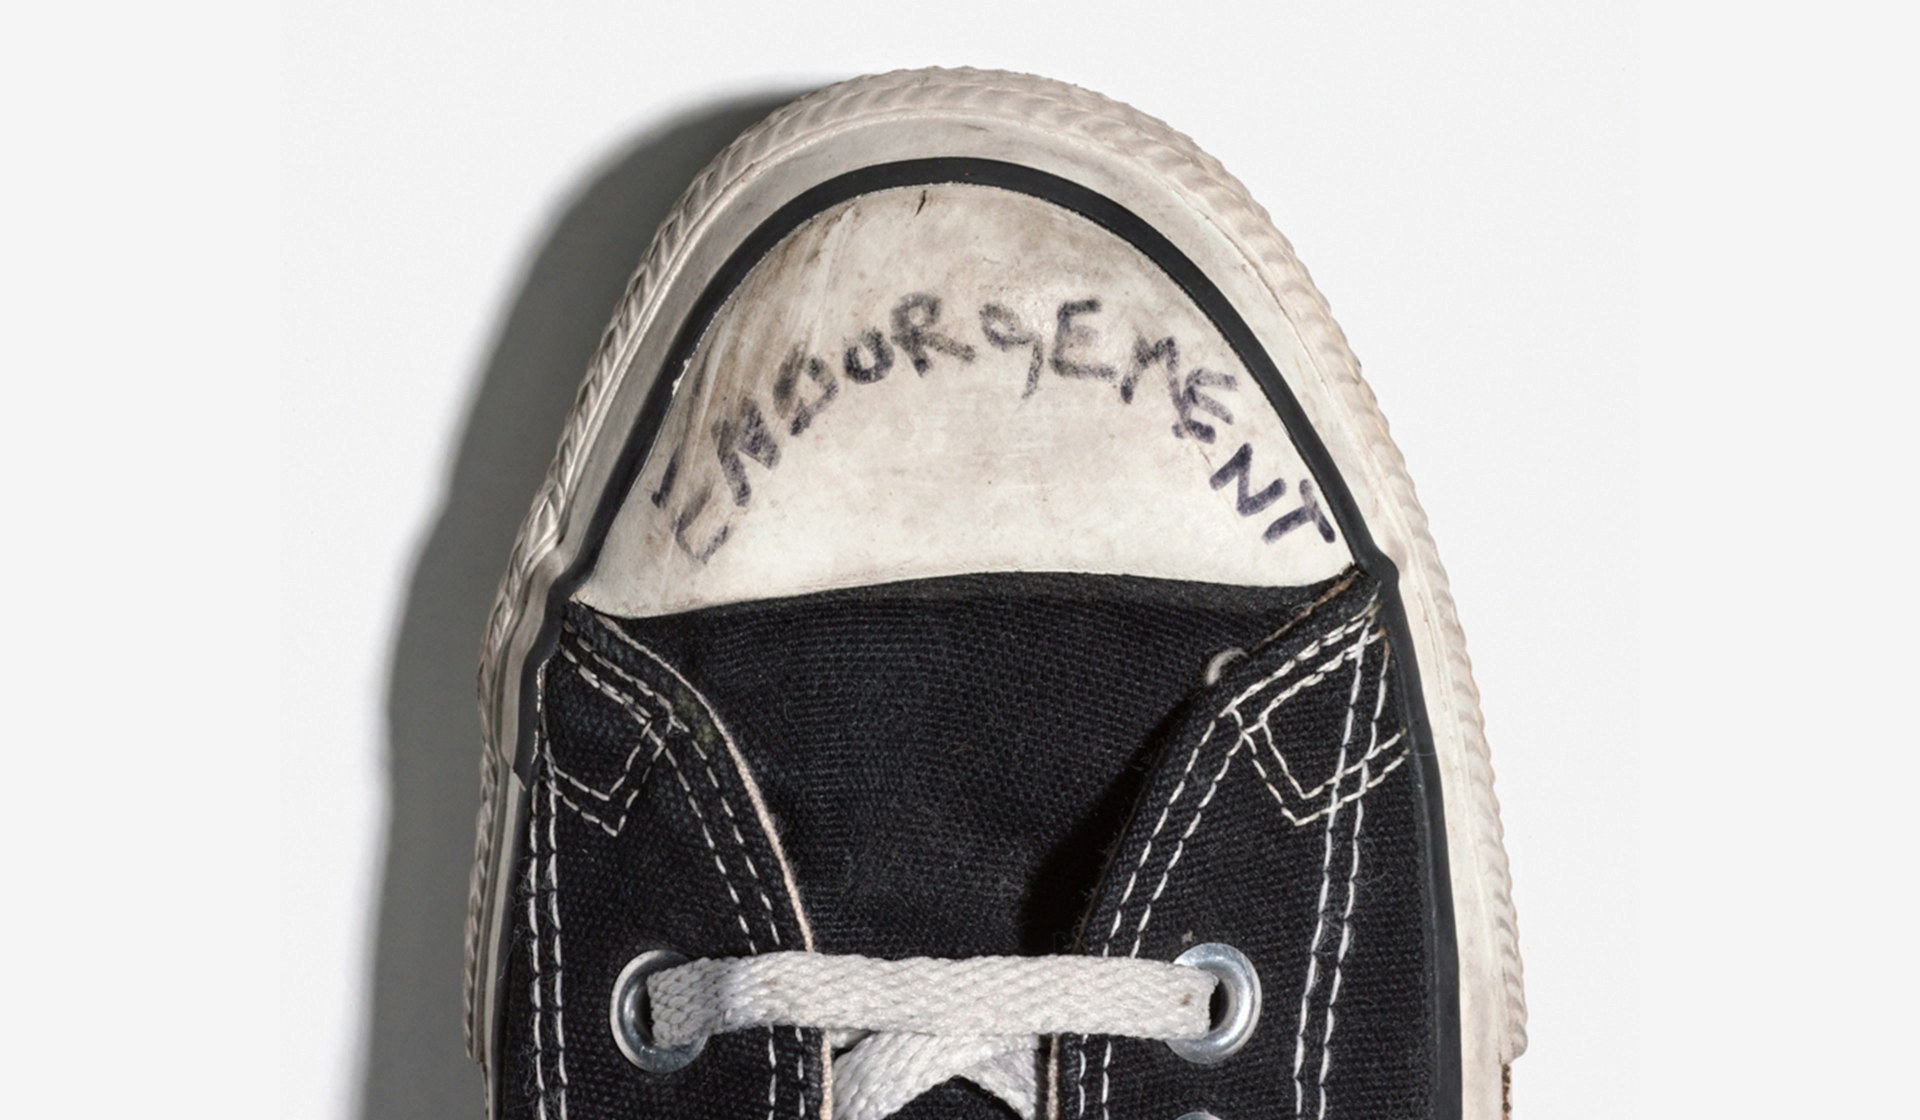 In Pictures: Kurt Cobain’s most personal possessions